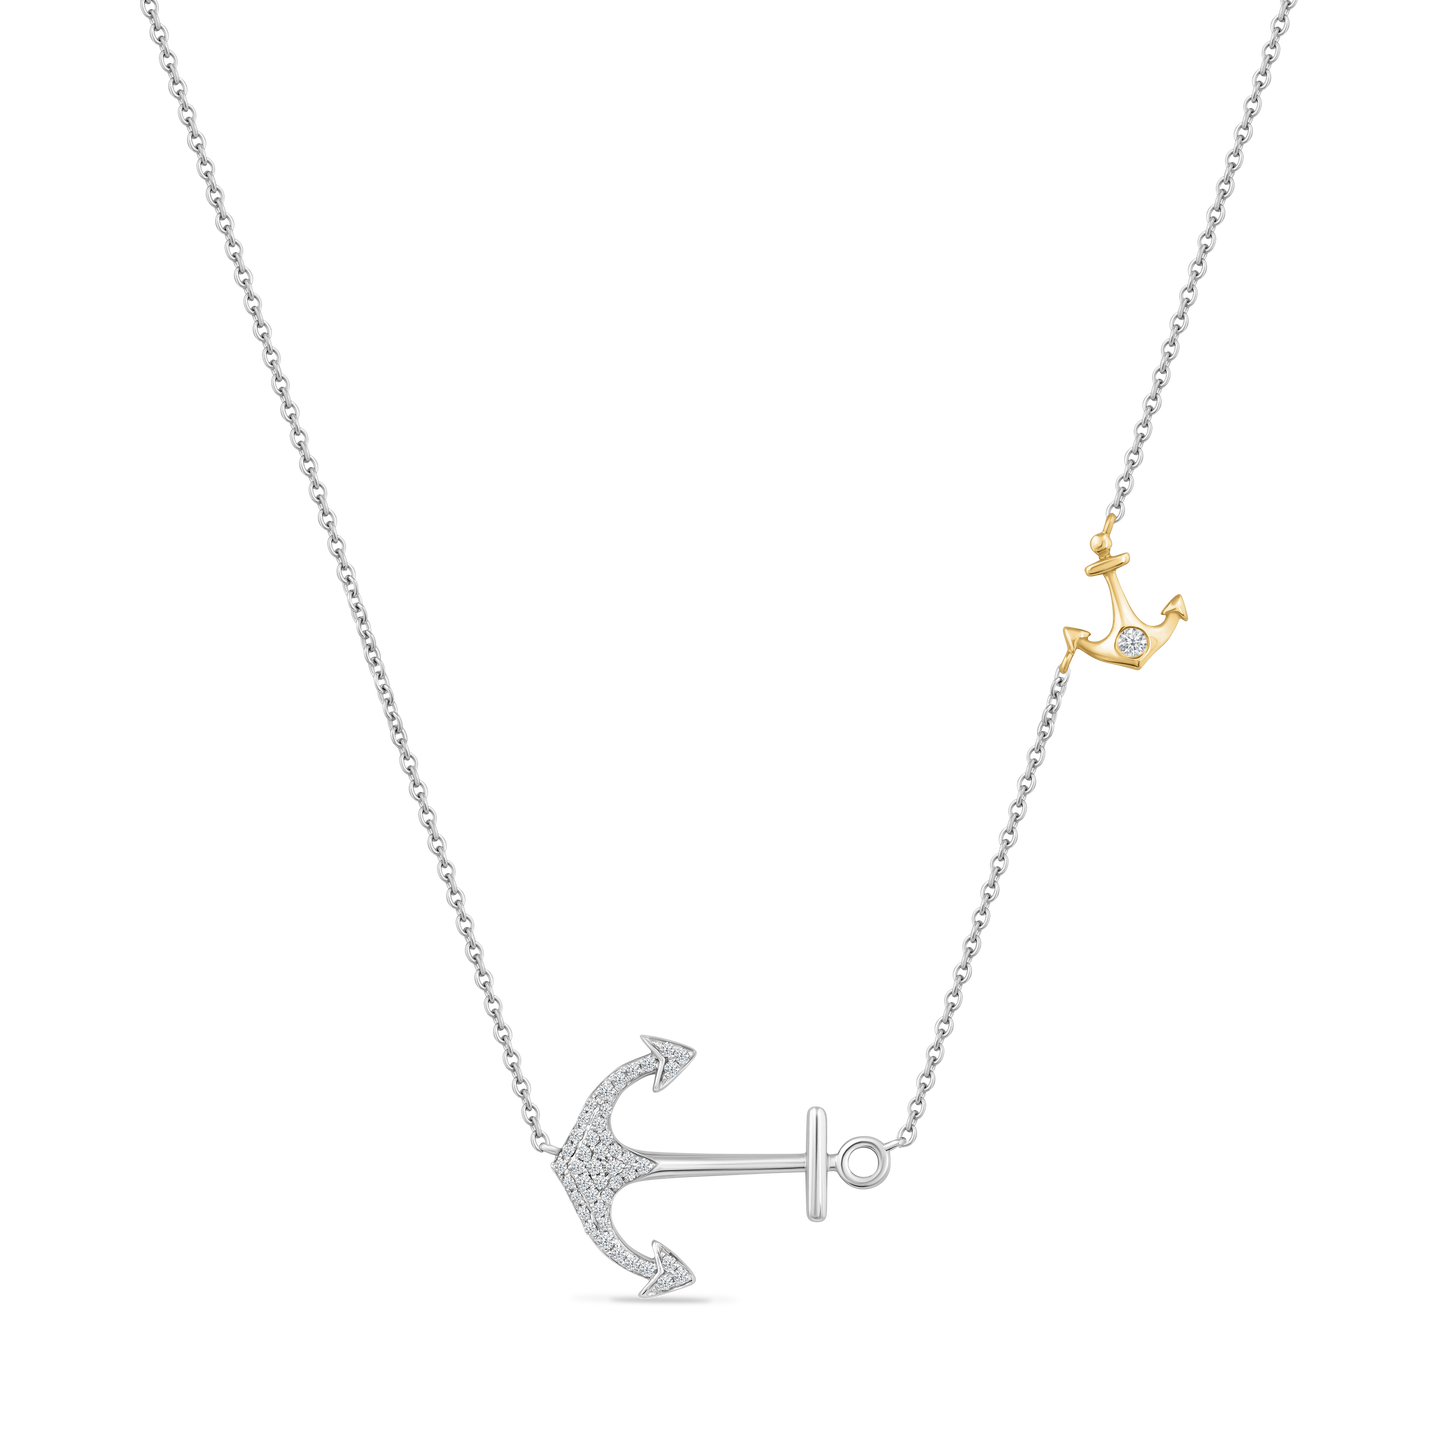 14K SIDEWAYS ANCHOR NECKLACE WITH 44 DIAMONDS 0.15CT, 20MM WIDTH, ON 18 INCHES CHAIN